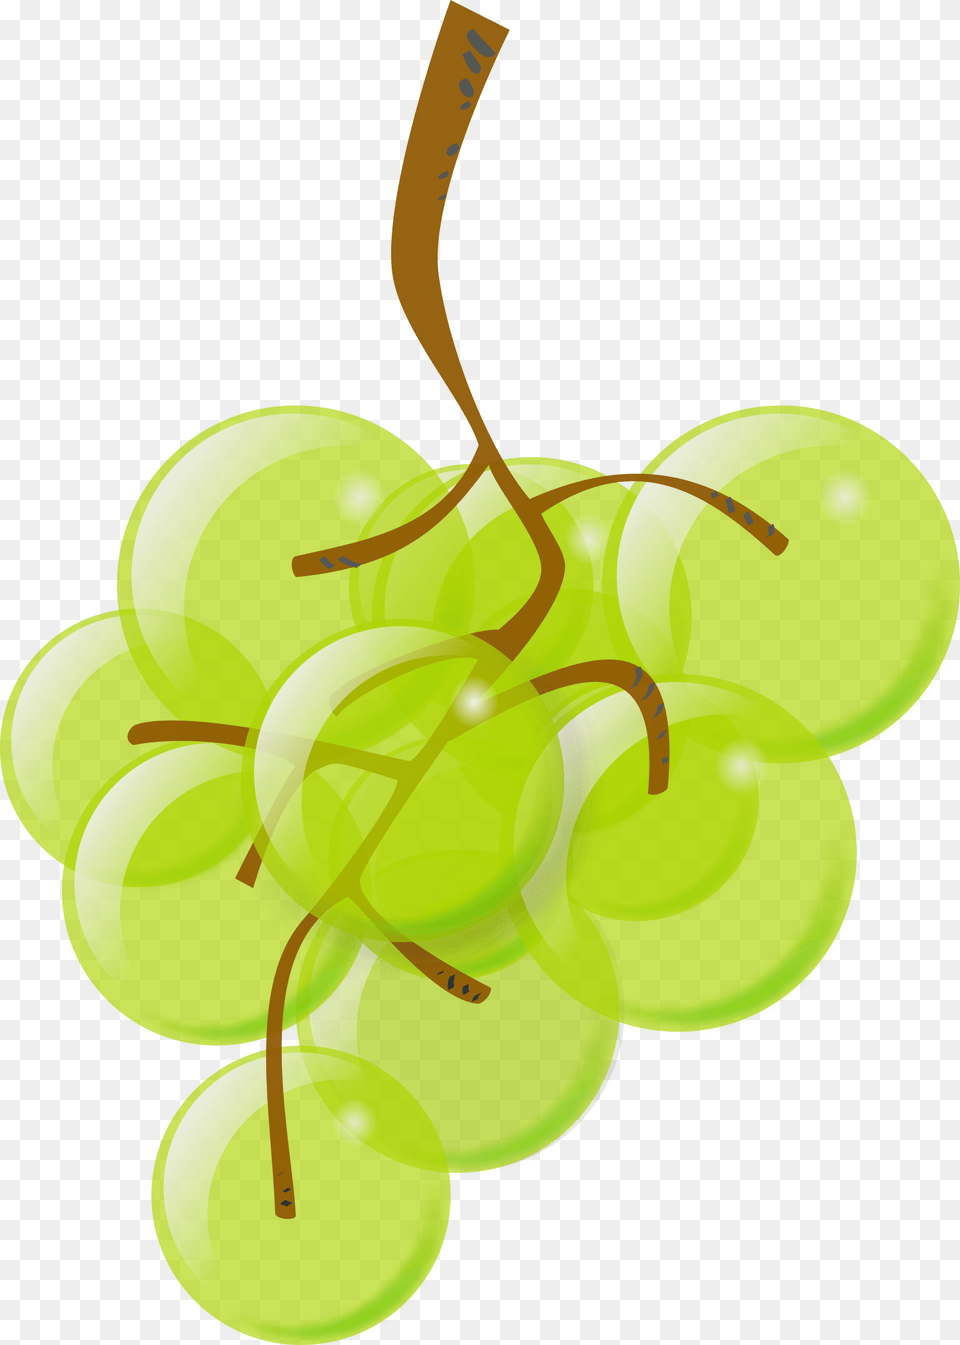 This Free Icons Design Of Green Grapes, Food, Fruit, Plant, Produce Png Image